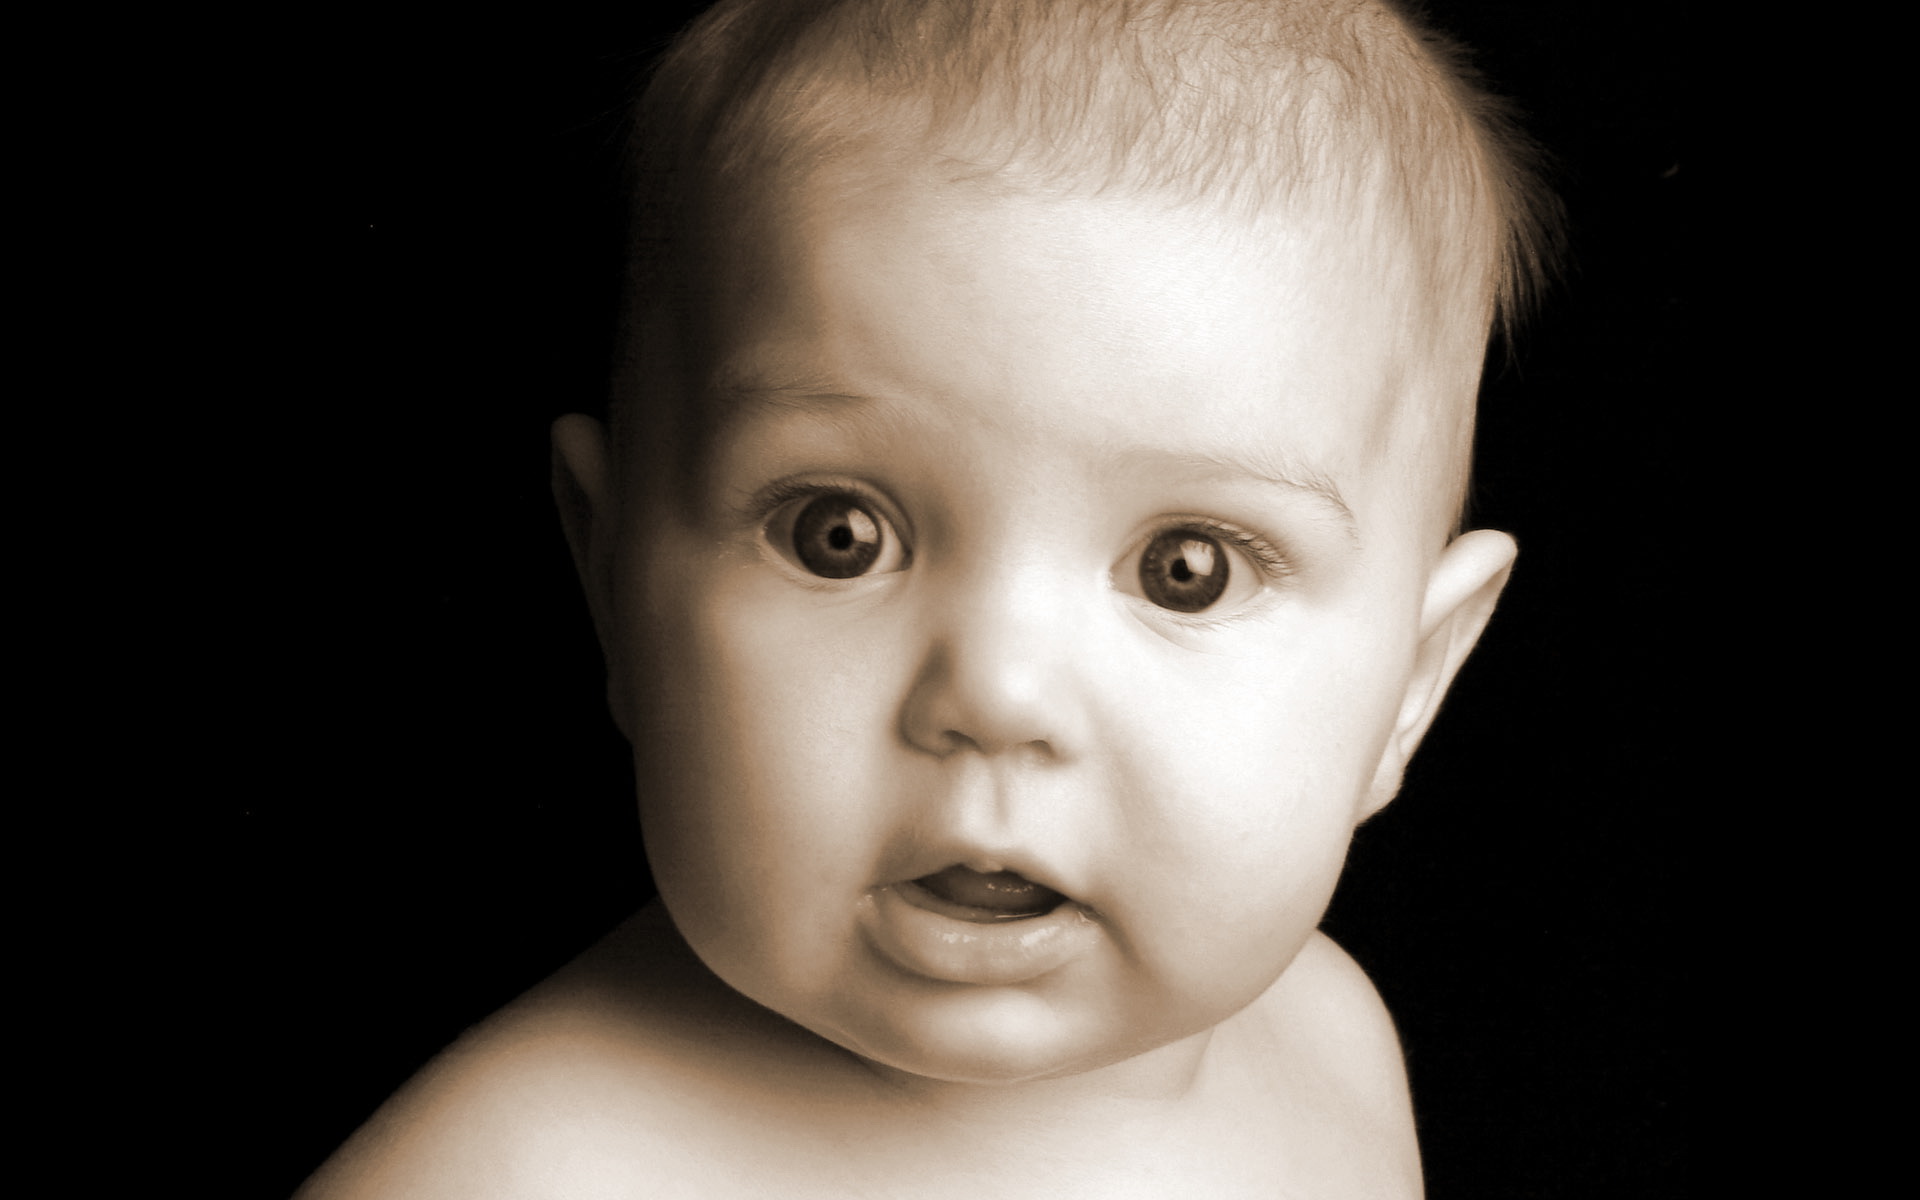 File:Baby Face.JPG - Wikimedia Commons